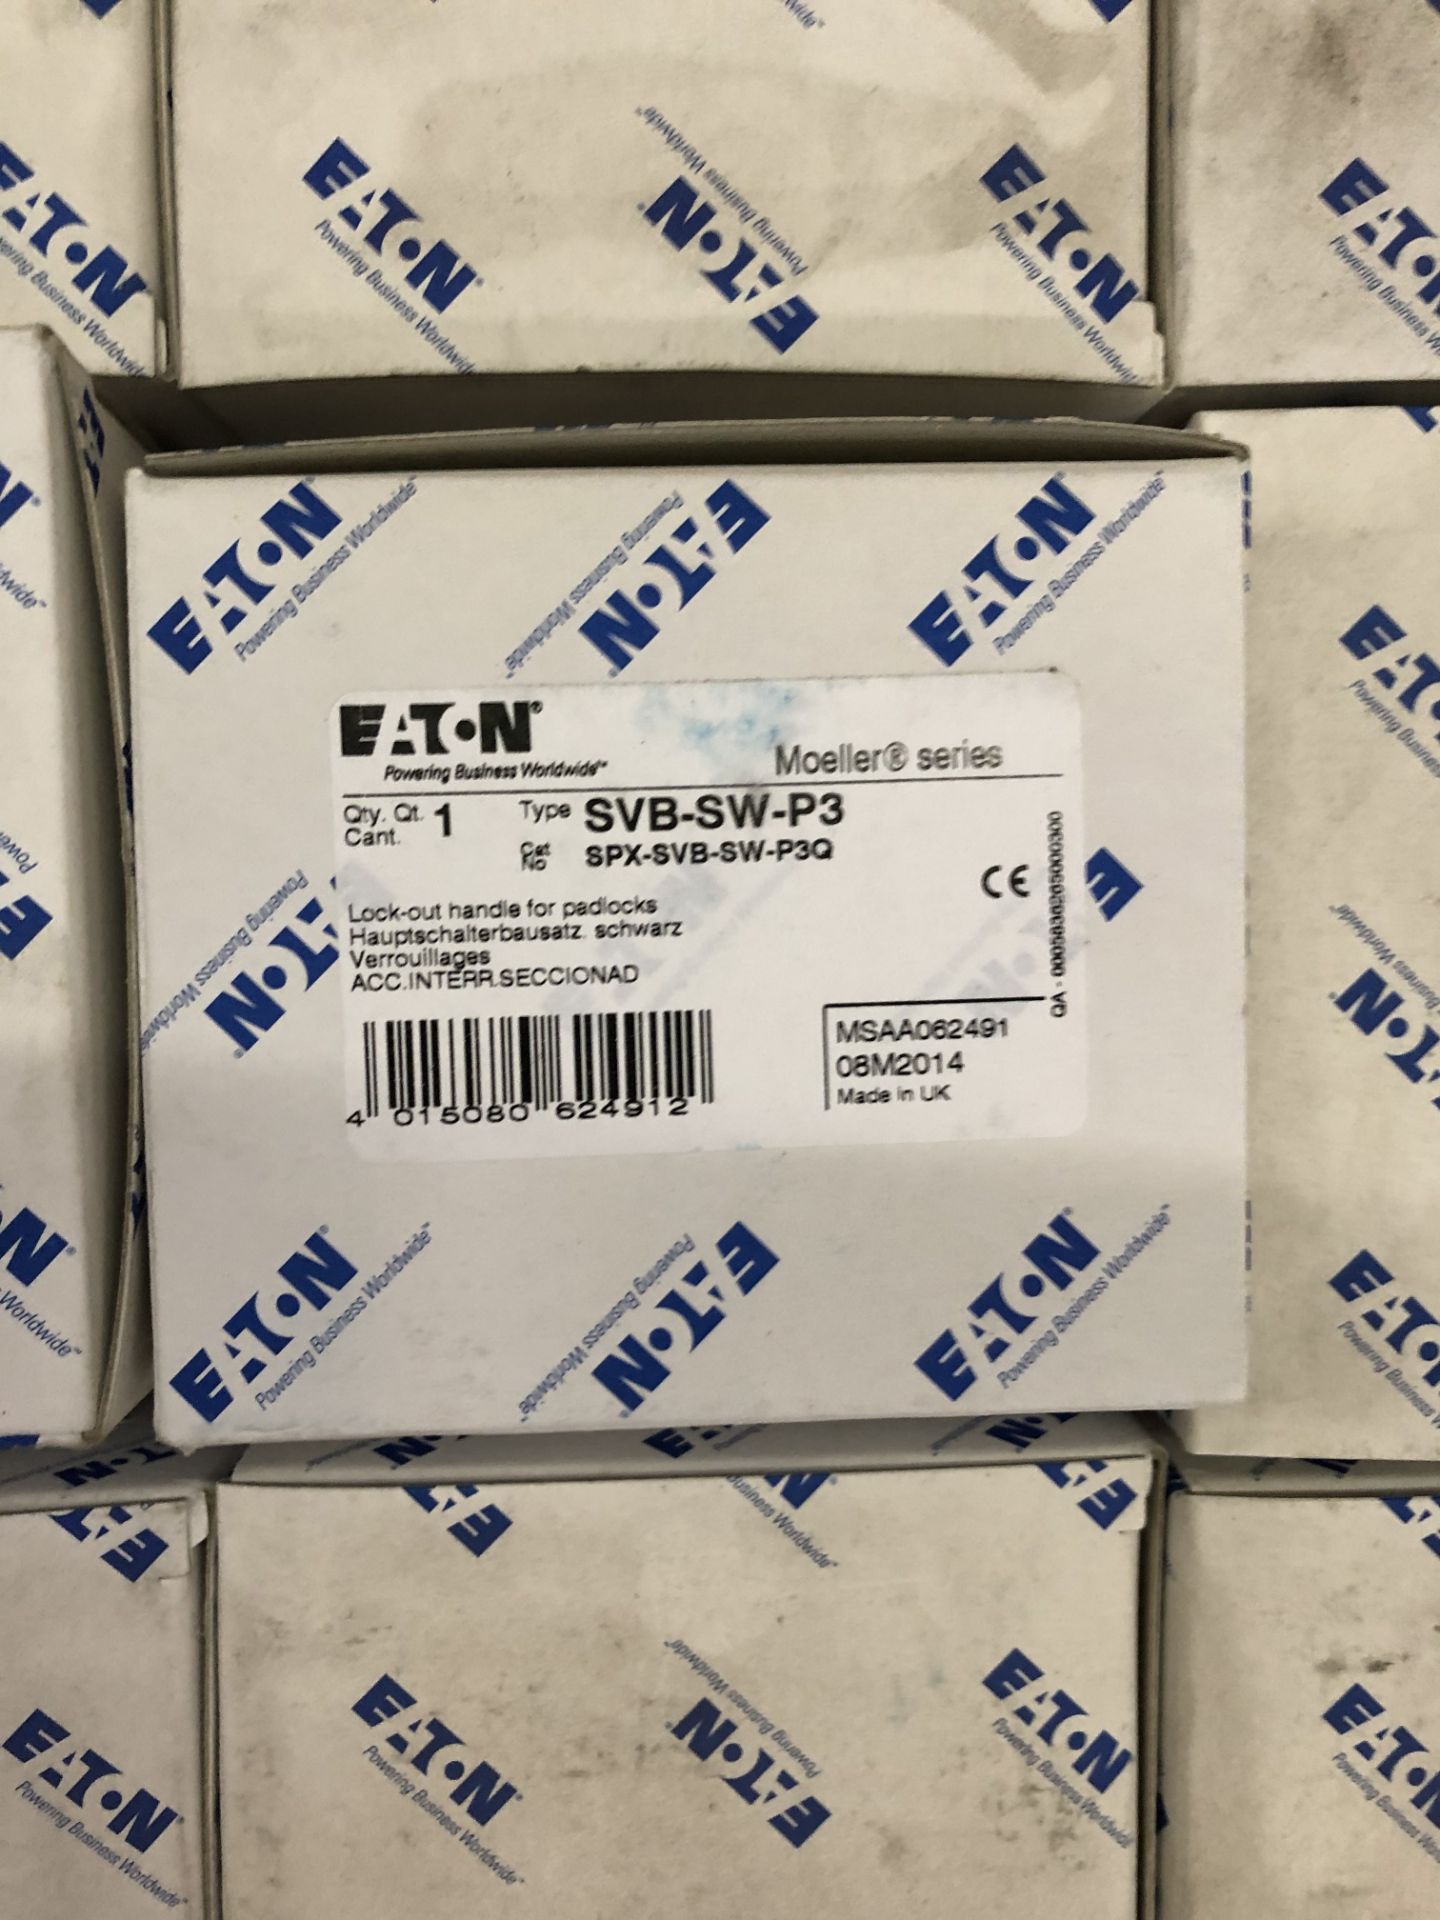 PALLET OF (APPROX. 90) EATON PADLOCK LOCKOUT HANDLES MODEL-SUB-SW-P3 (30) EATON ELCRS-485 ADAPTER ( - Image 2 of 6